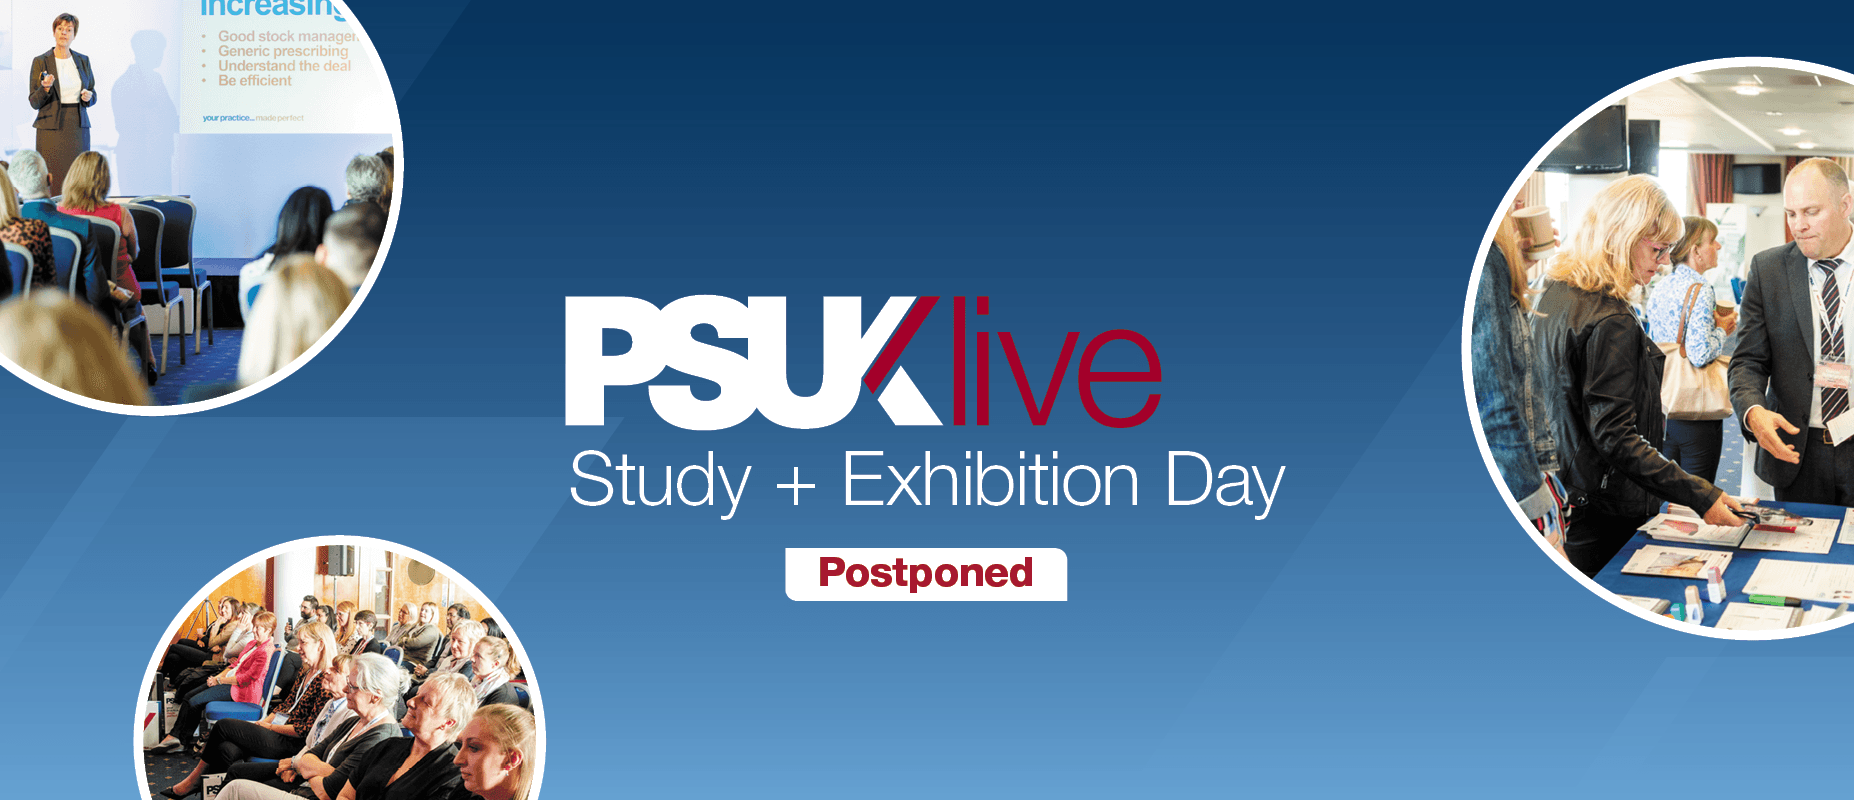 PSUK Live Study and Exhibition Day Postponed